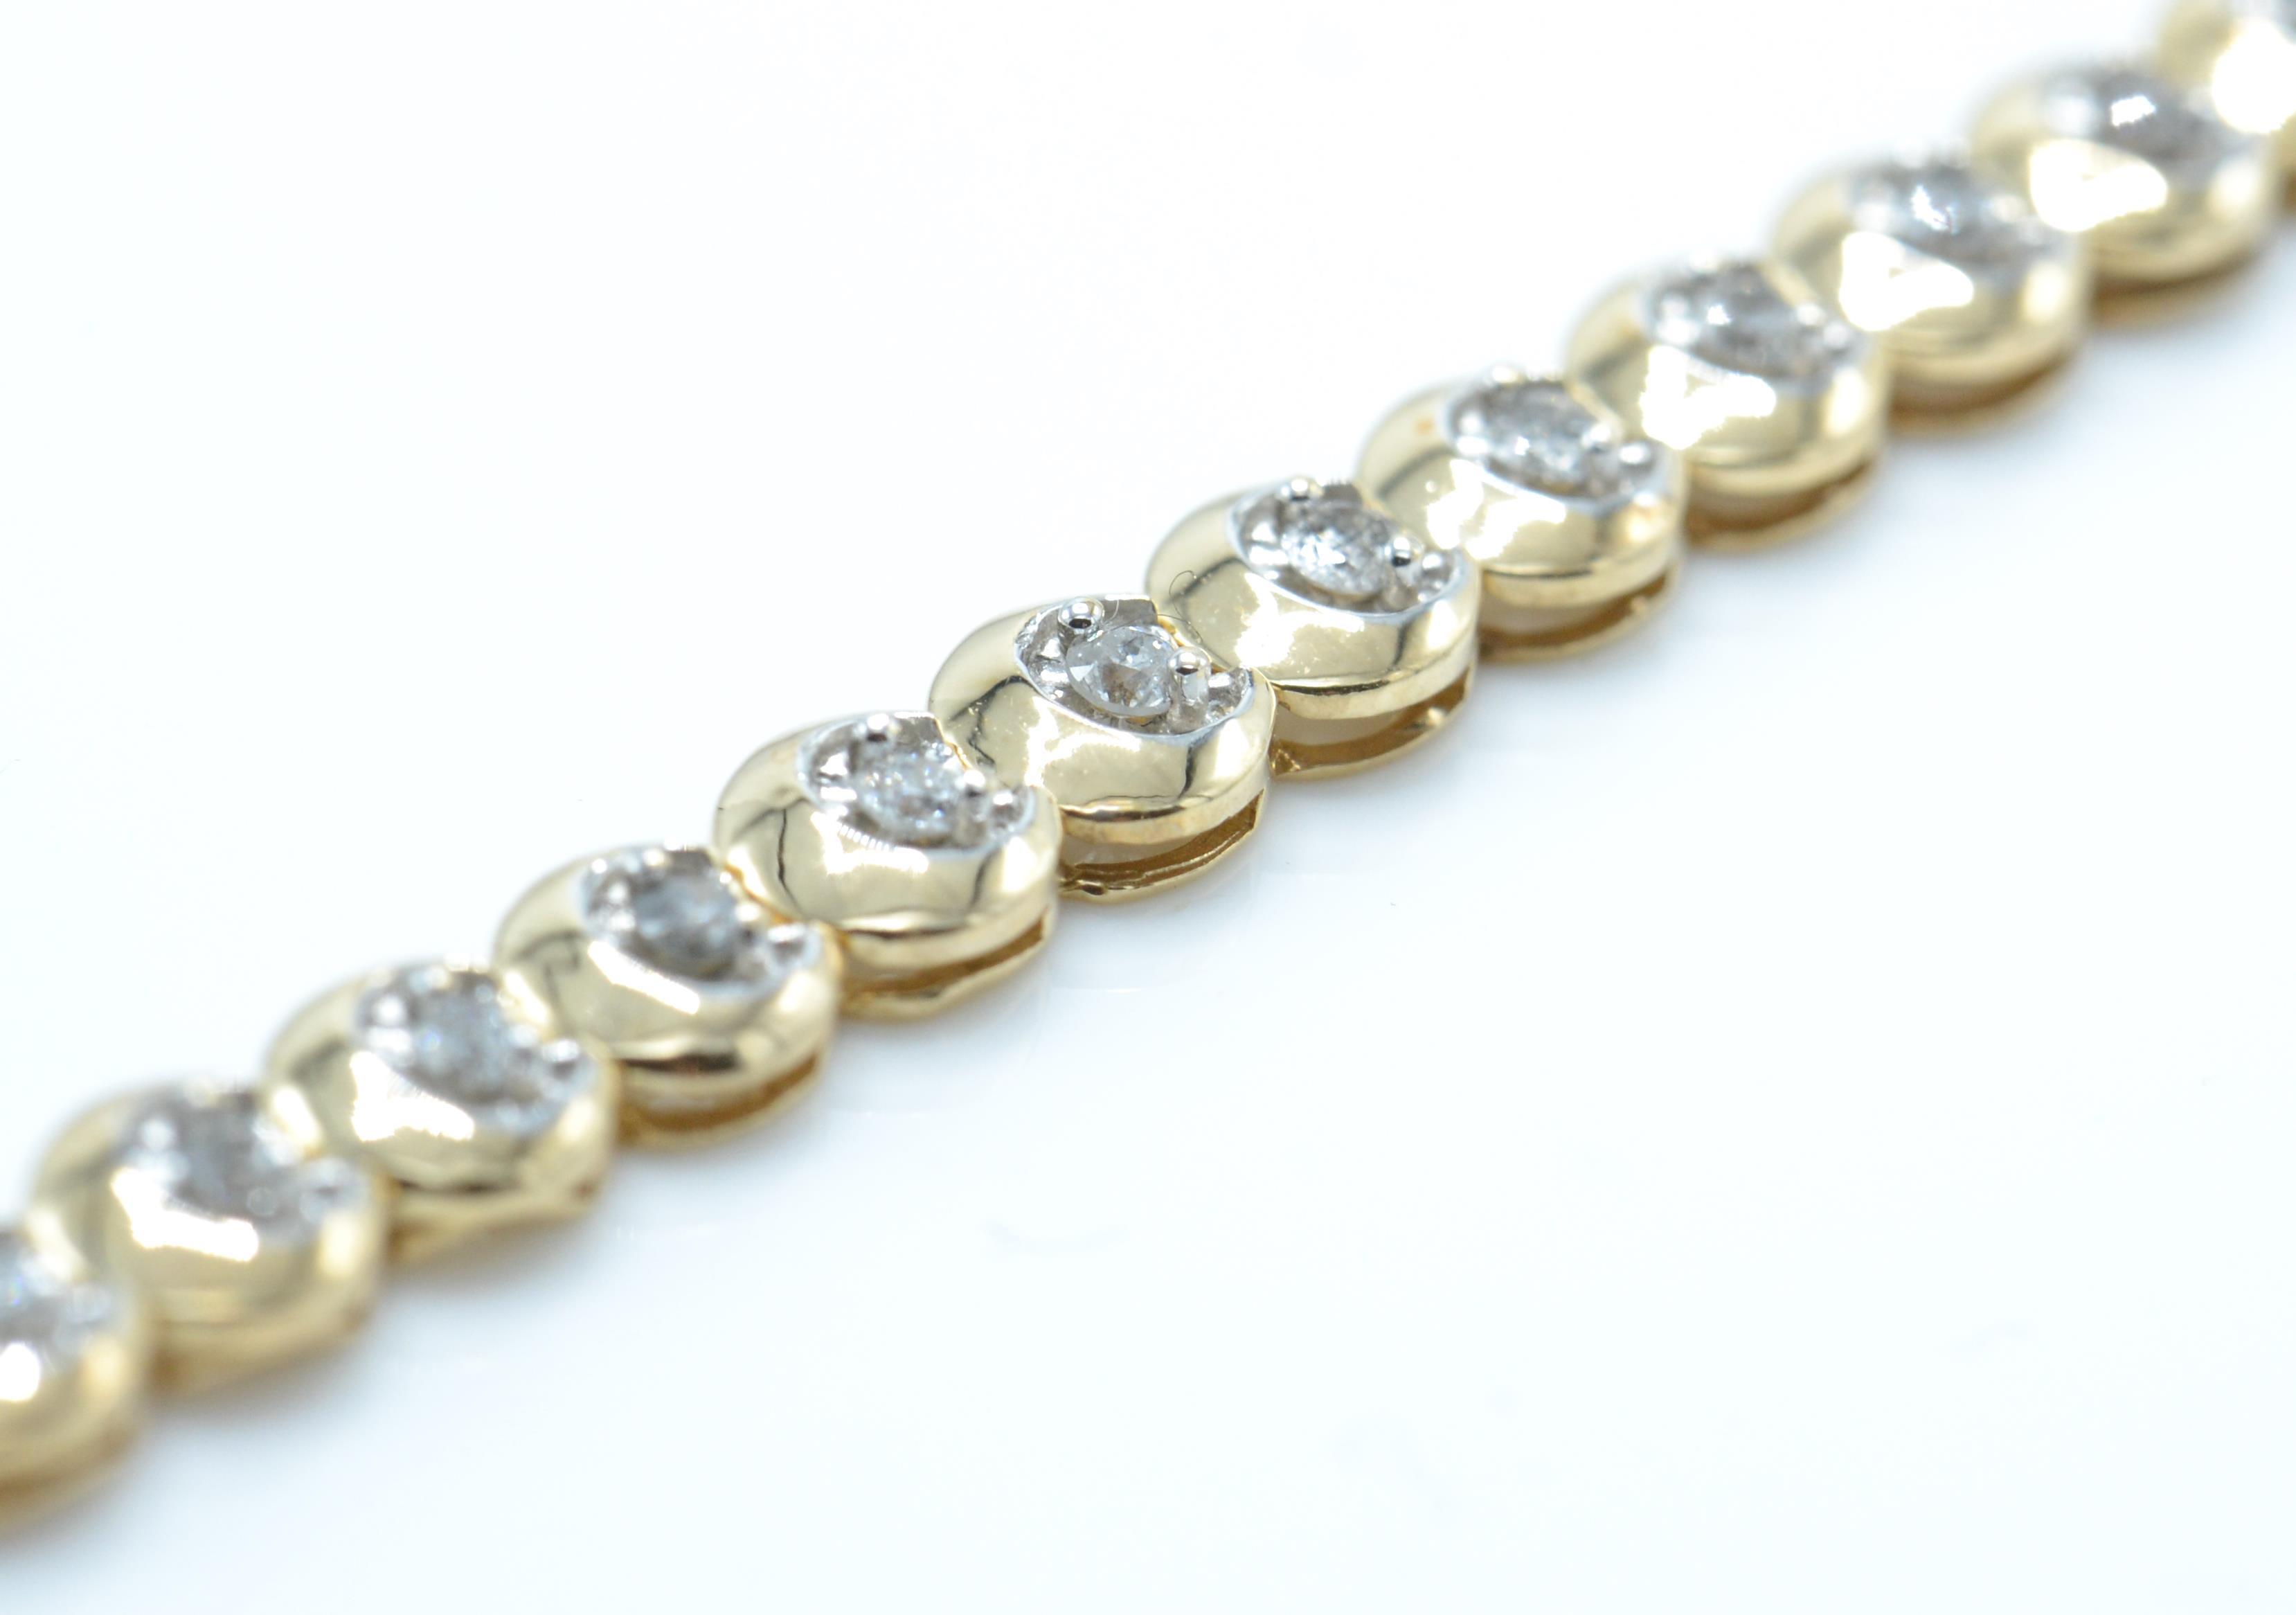 A hallmarked 9ct gold and diamond tennis bracelet with 40 brilliant cut diamonds - Image 4 of 5